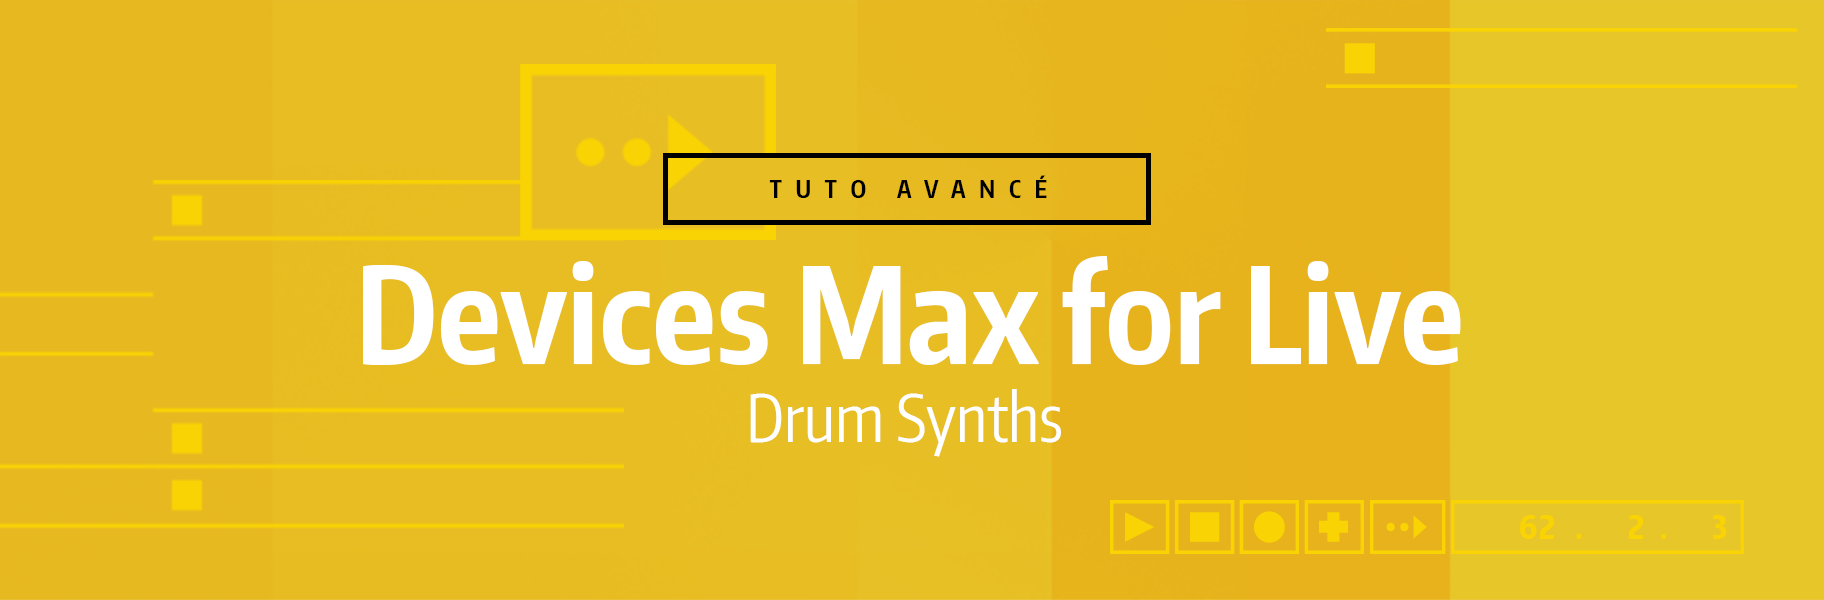 Tutoriel Ableton Live - Devices Max for Live - Drum Synths